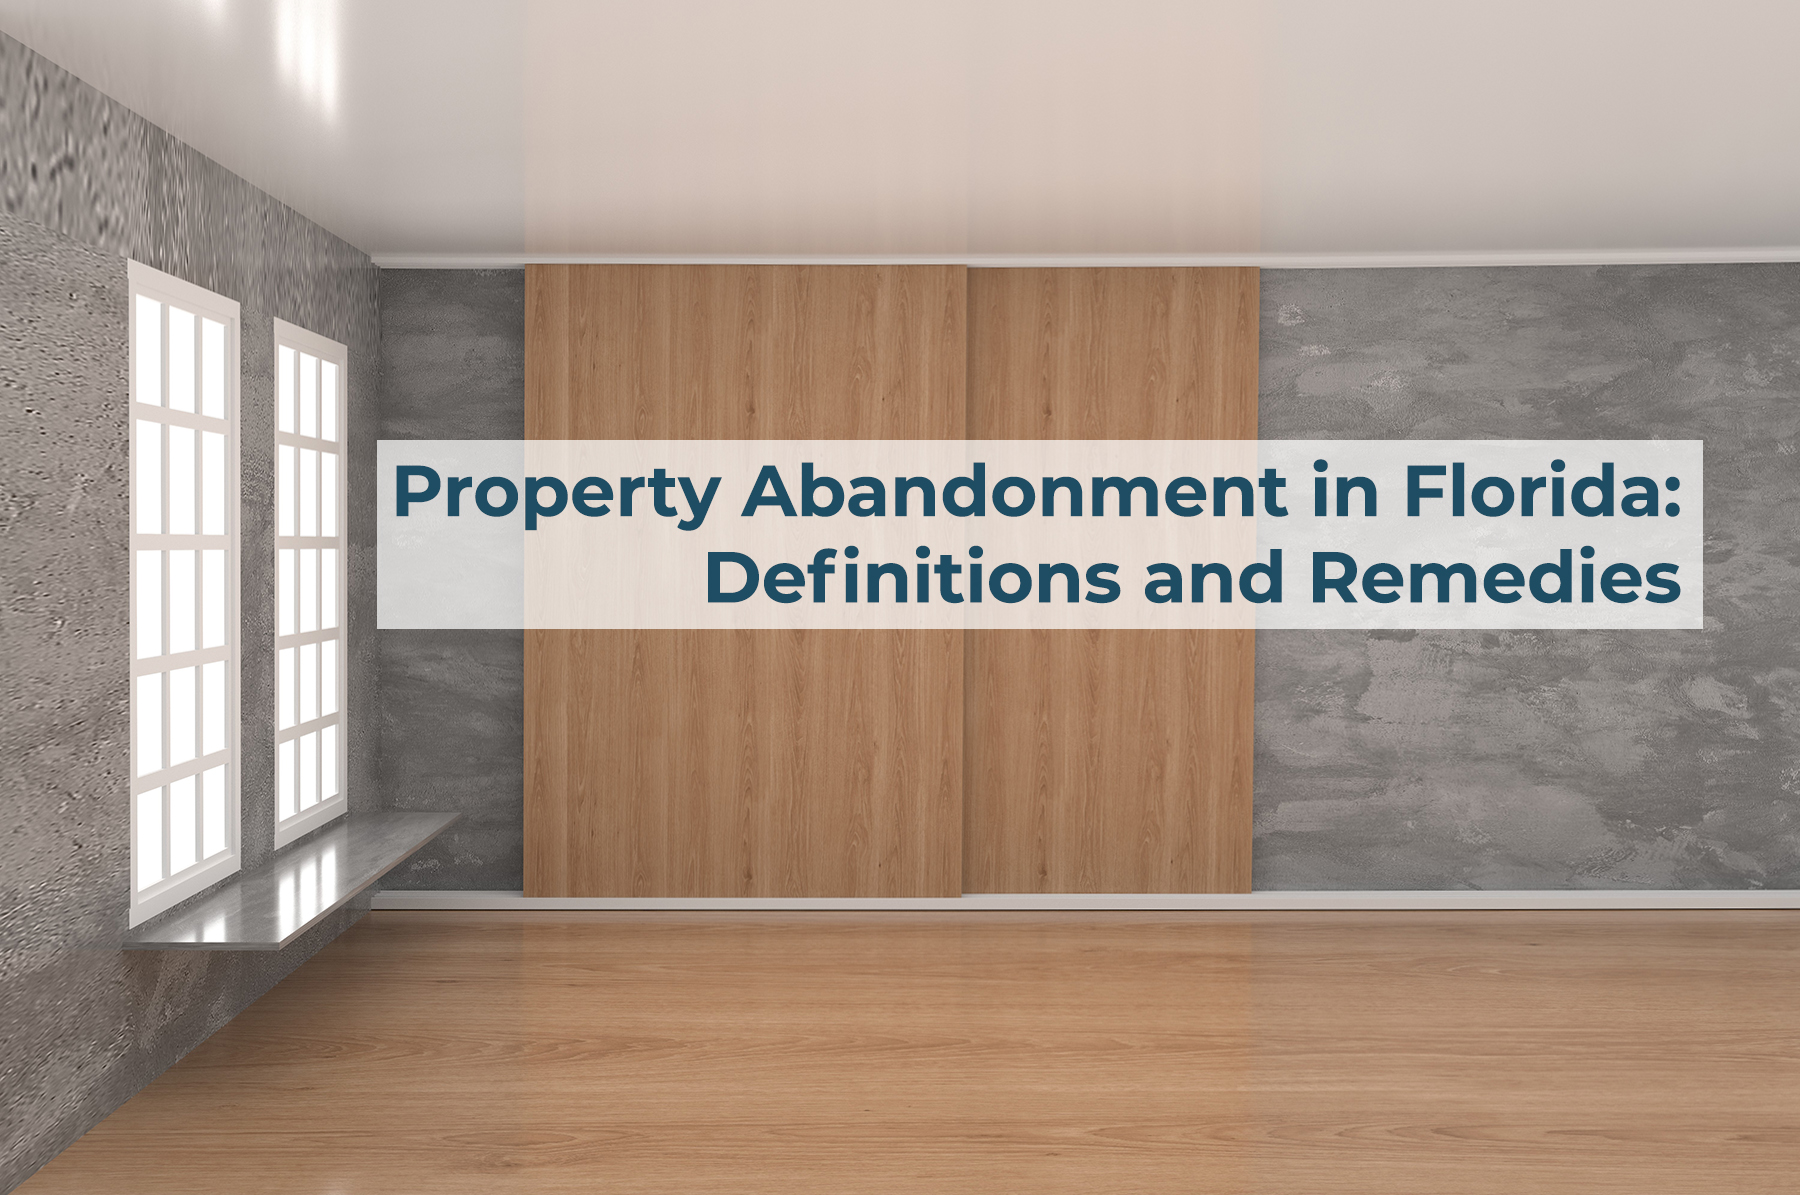 PROPERTY-ABANDONMENT-IN-FLORIDA-DEFINITIONS-AND-REMEDIES